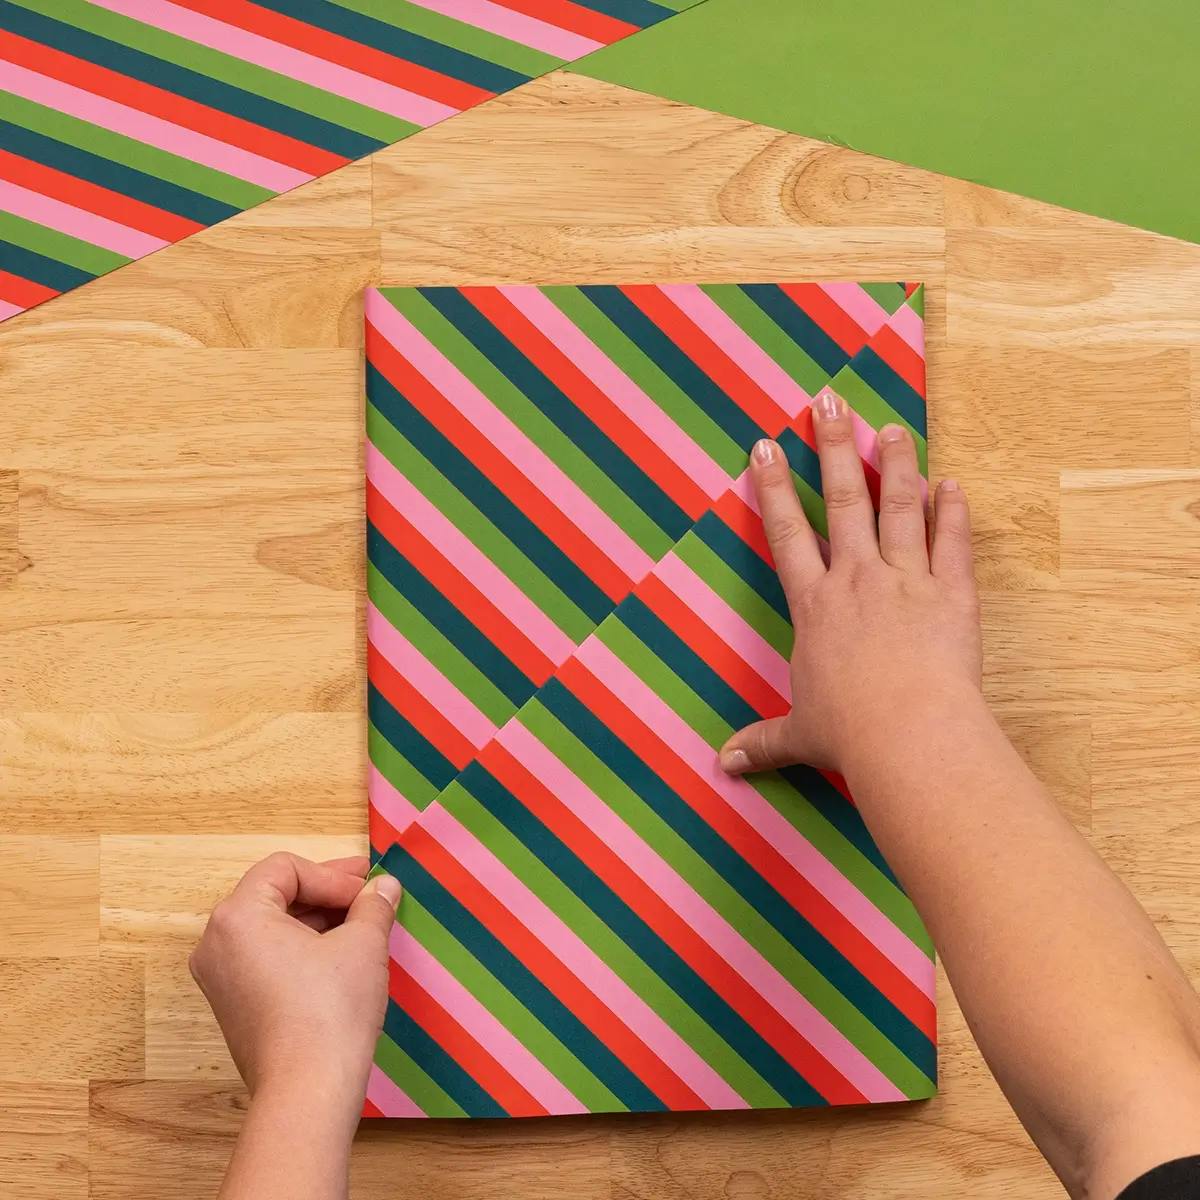 Making a fold in the wrapping paper to contain tags, floral accompaniments, and other decoration.